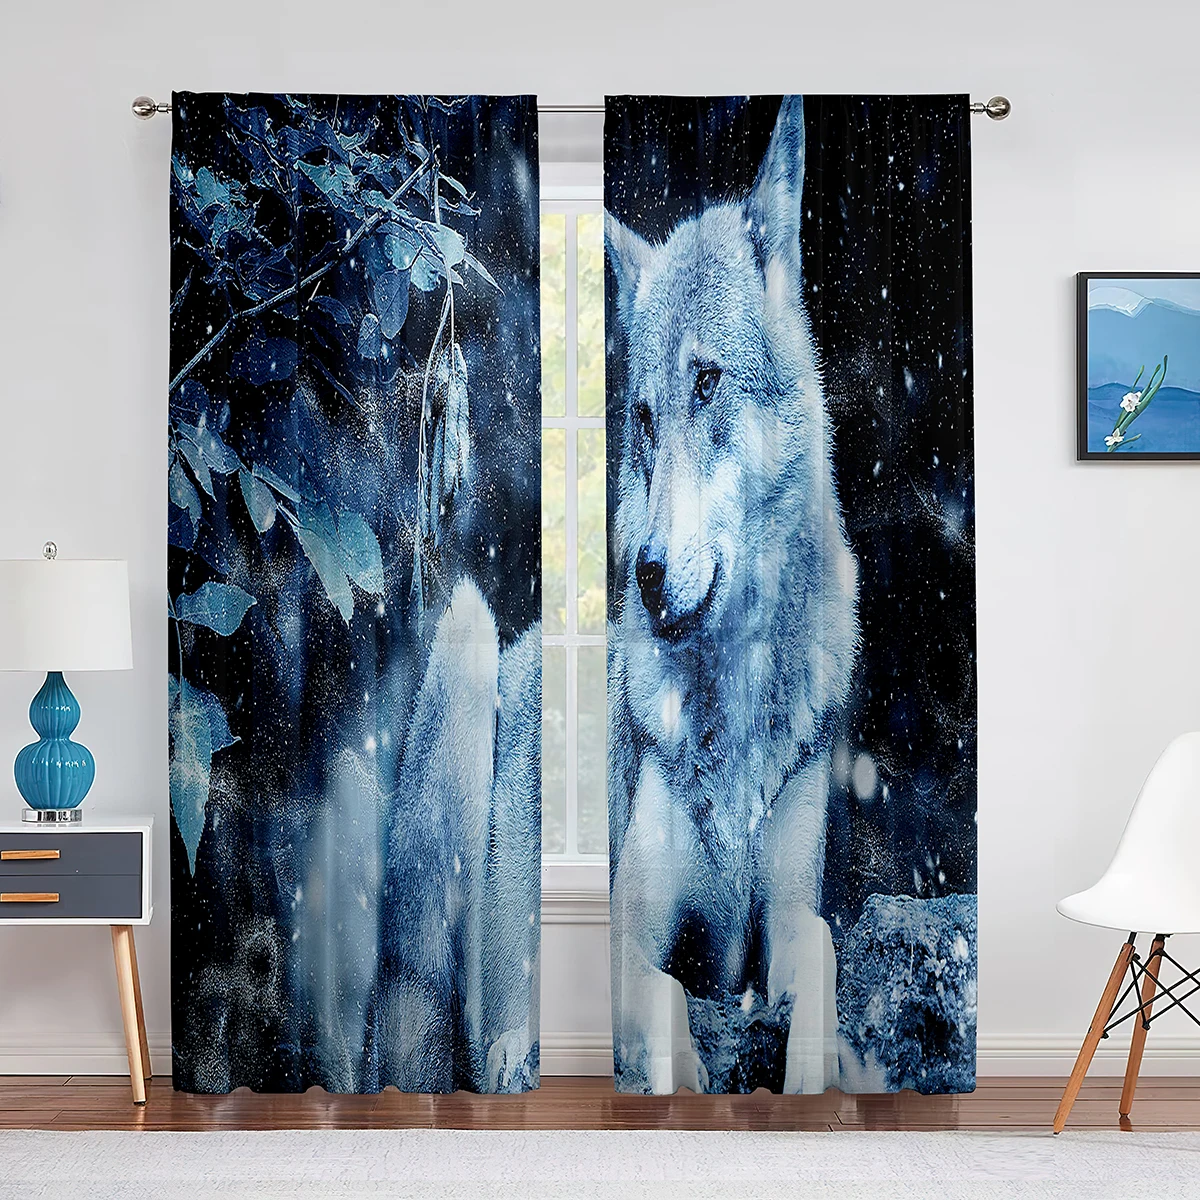 

Wolf Winter Snow Forest Wild Animal Tulle Voile Curtains for Bedroom Window Curtain for Living Room Sheer Curtains Blinds Drapes